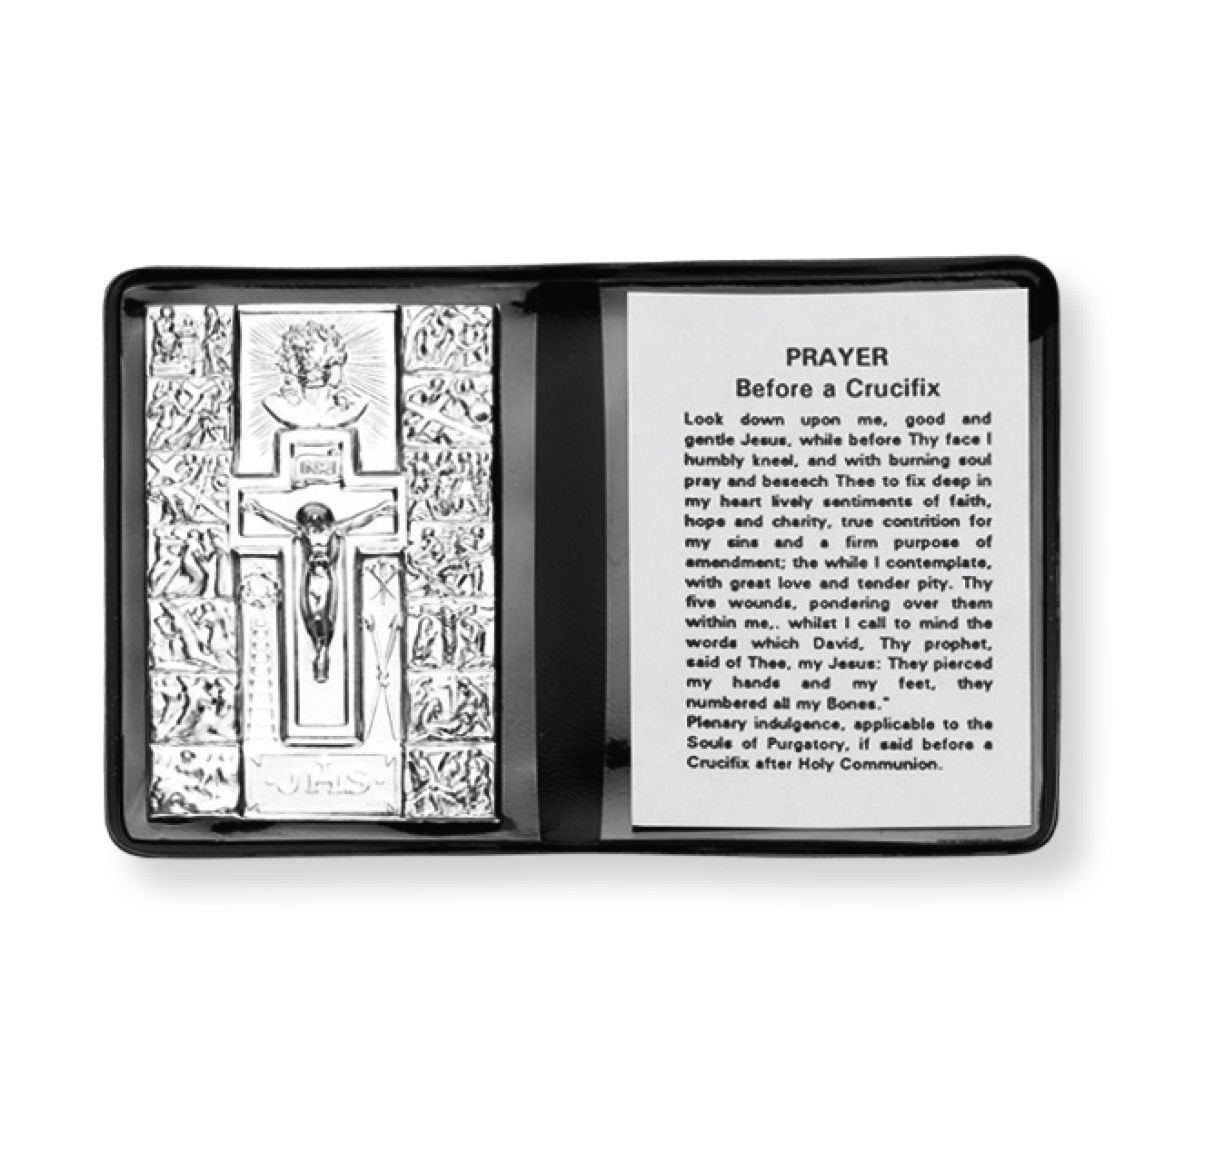 Prayer Before A Crucifix - Stations of the Cross Plaque in 2 1/2" x 4" Folder